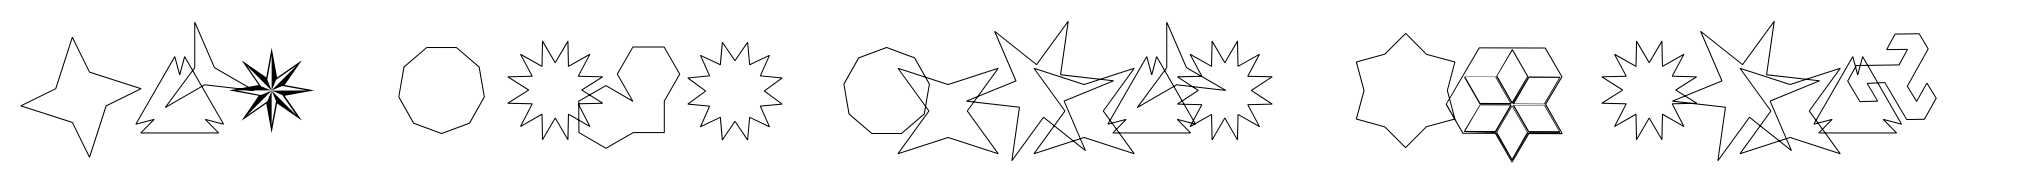 Ingy Star Tilings Outline image